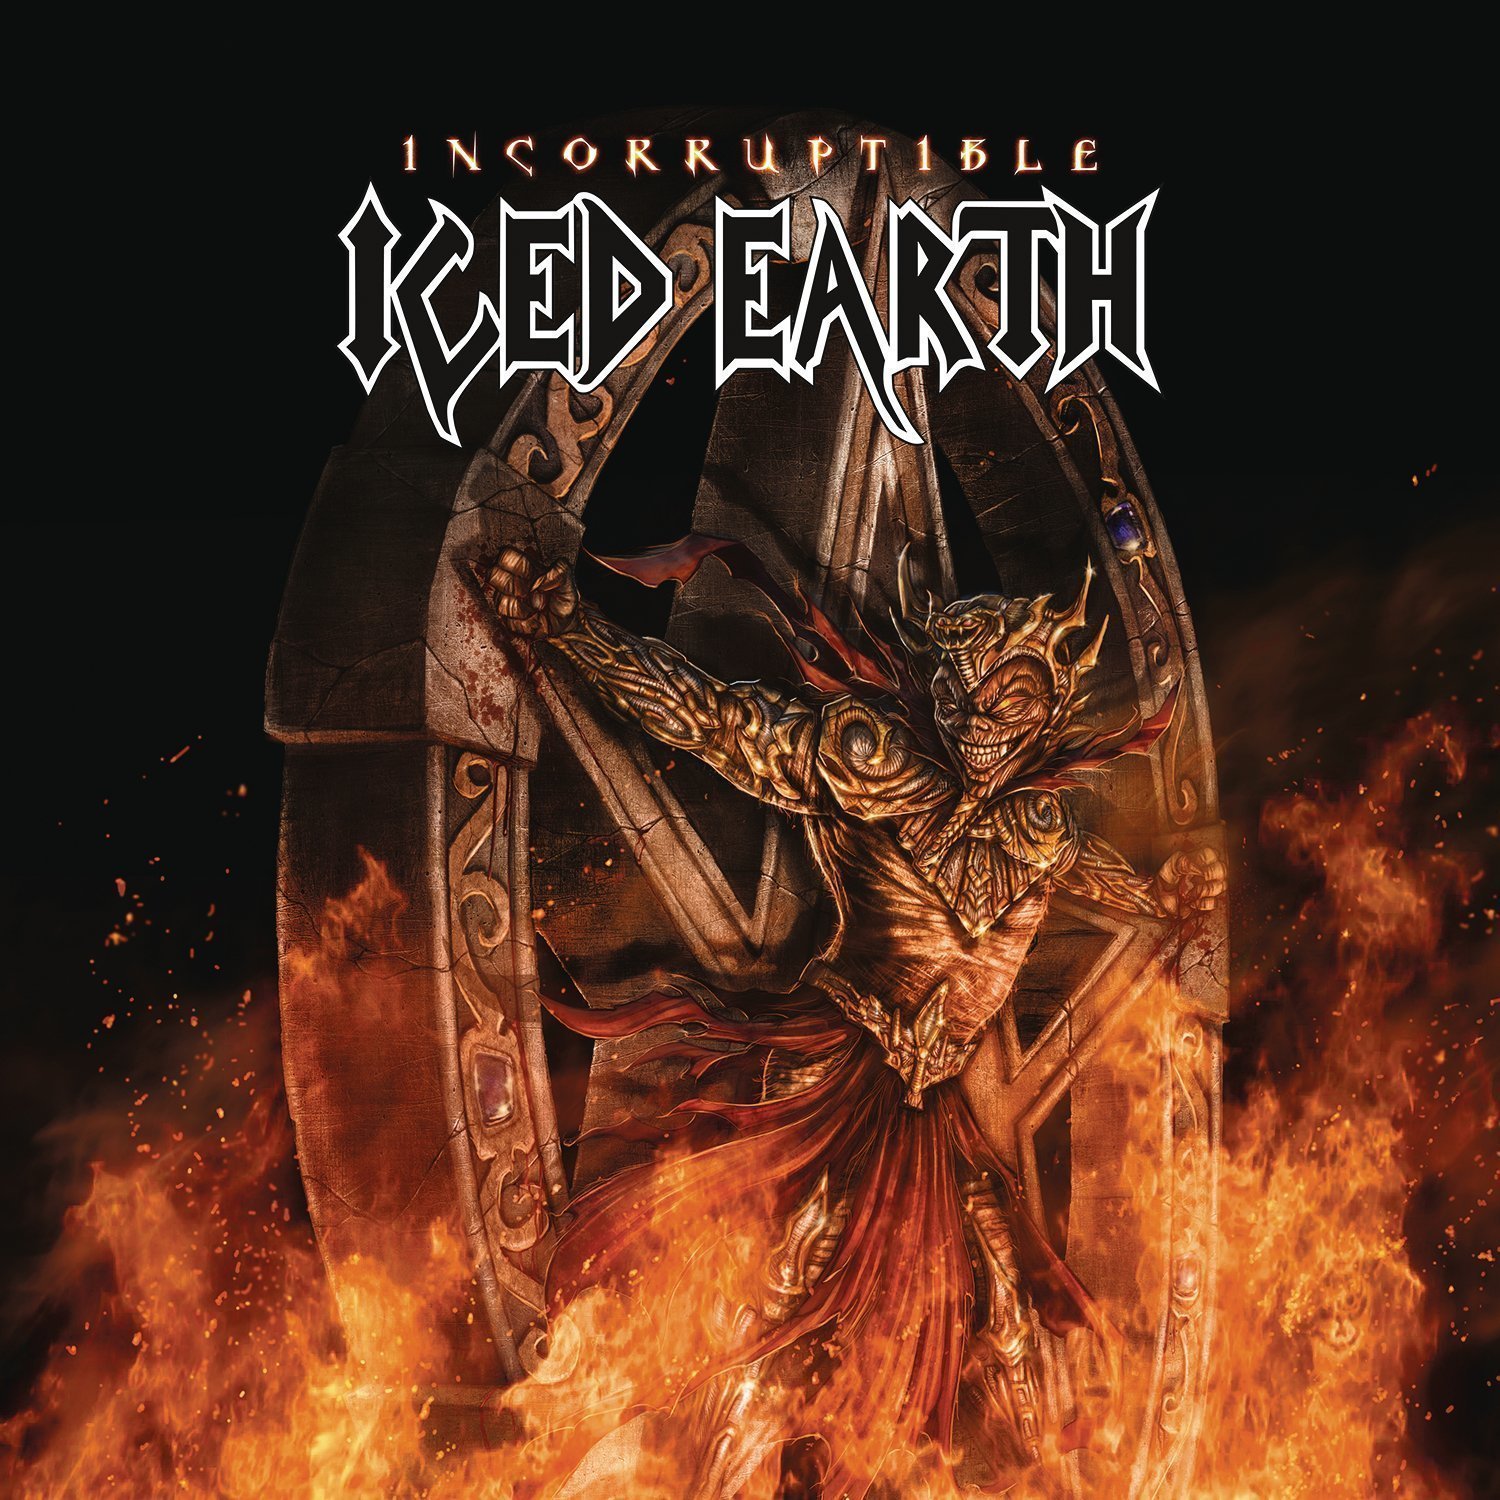 LP Iced Earth Incorruptible (2 LP)